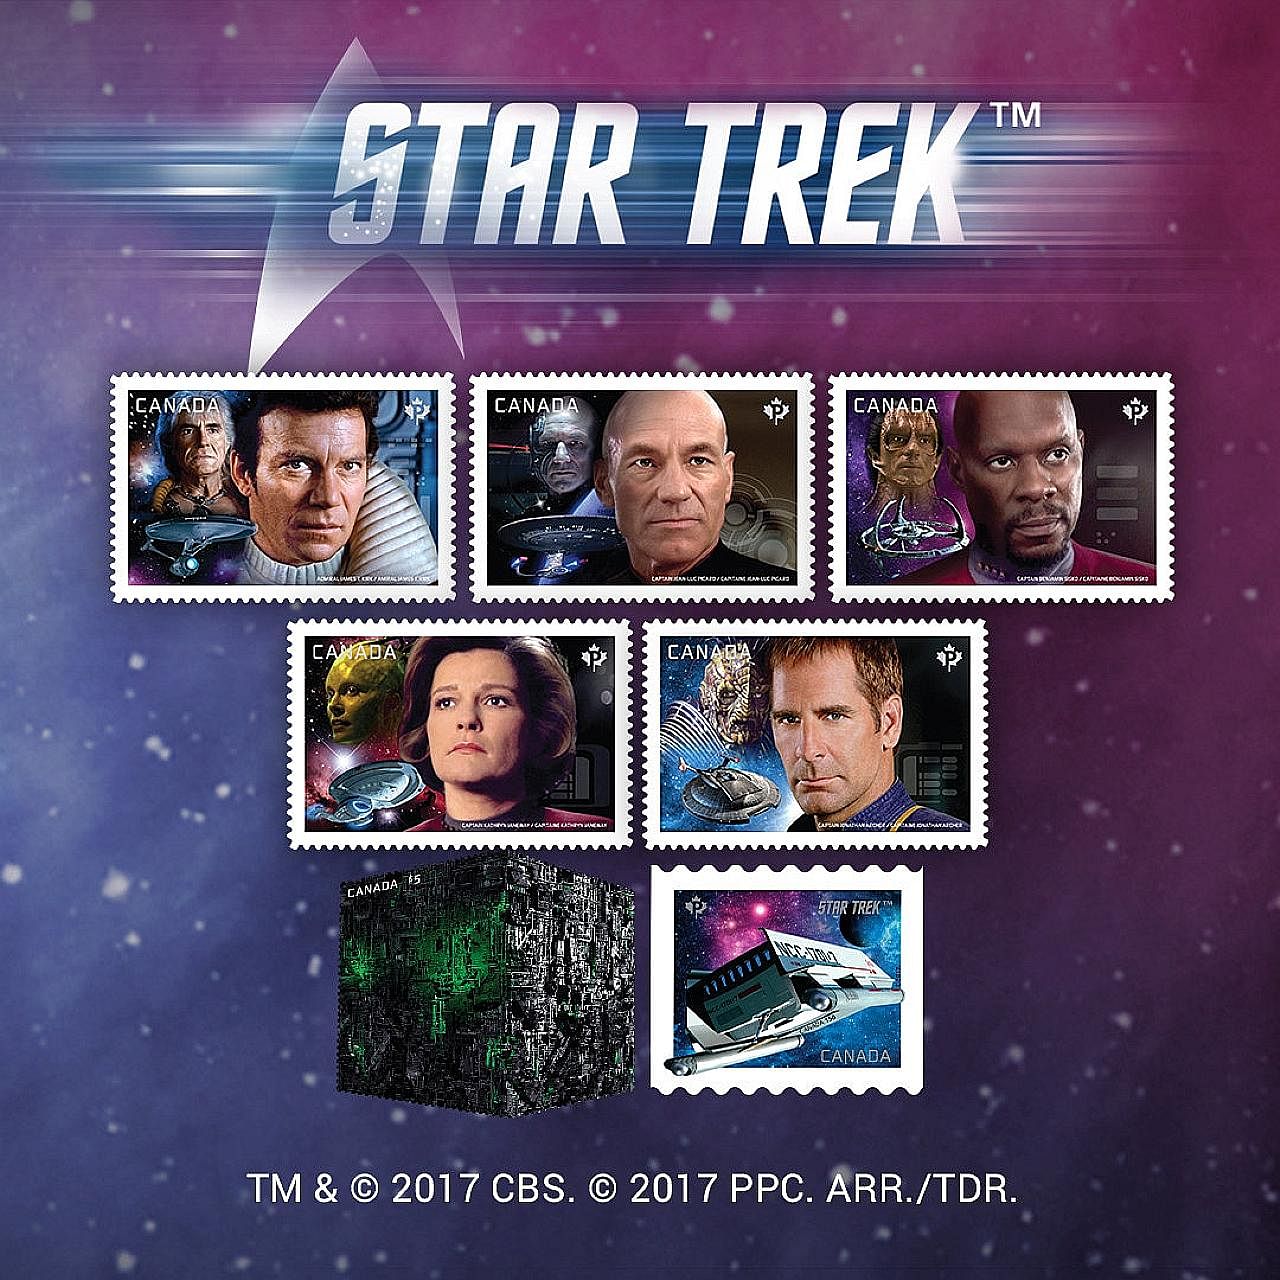 Star Trek continues to put its stamp on the philatelic world. Canada Post has just launched a collection of seven stamps, with five featuring the captains from each of the five Star Trek television series. They are shown with a key nemesis from the s